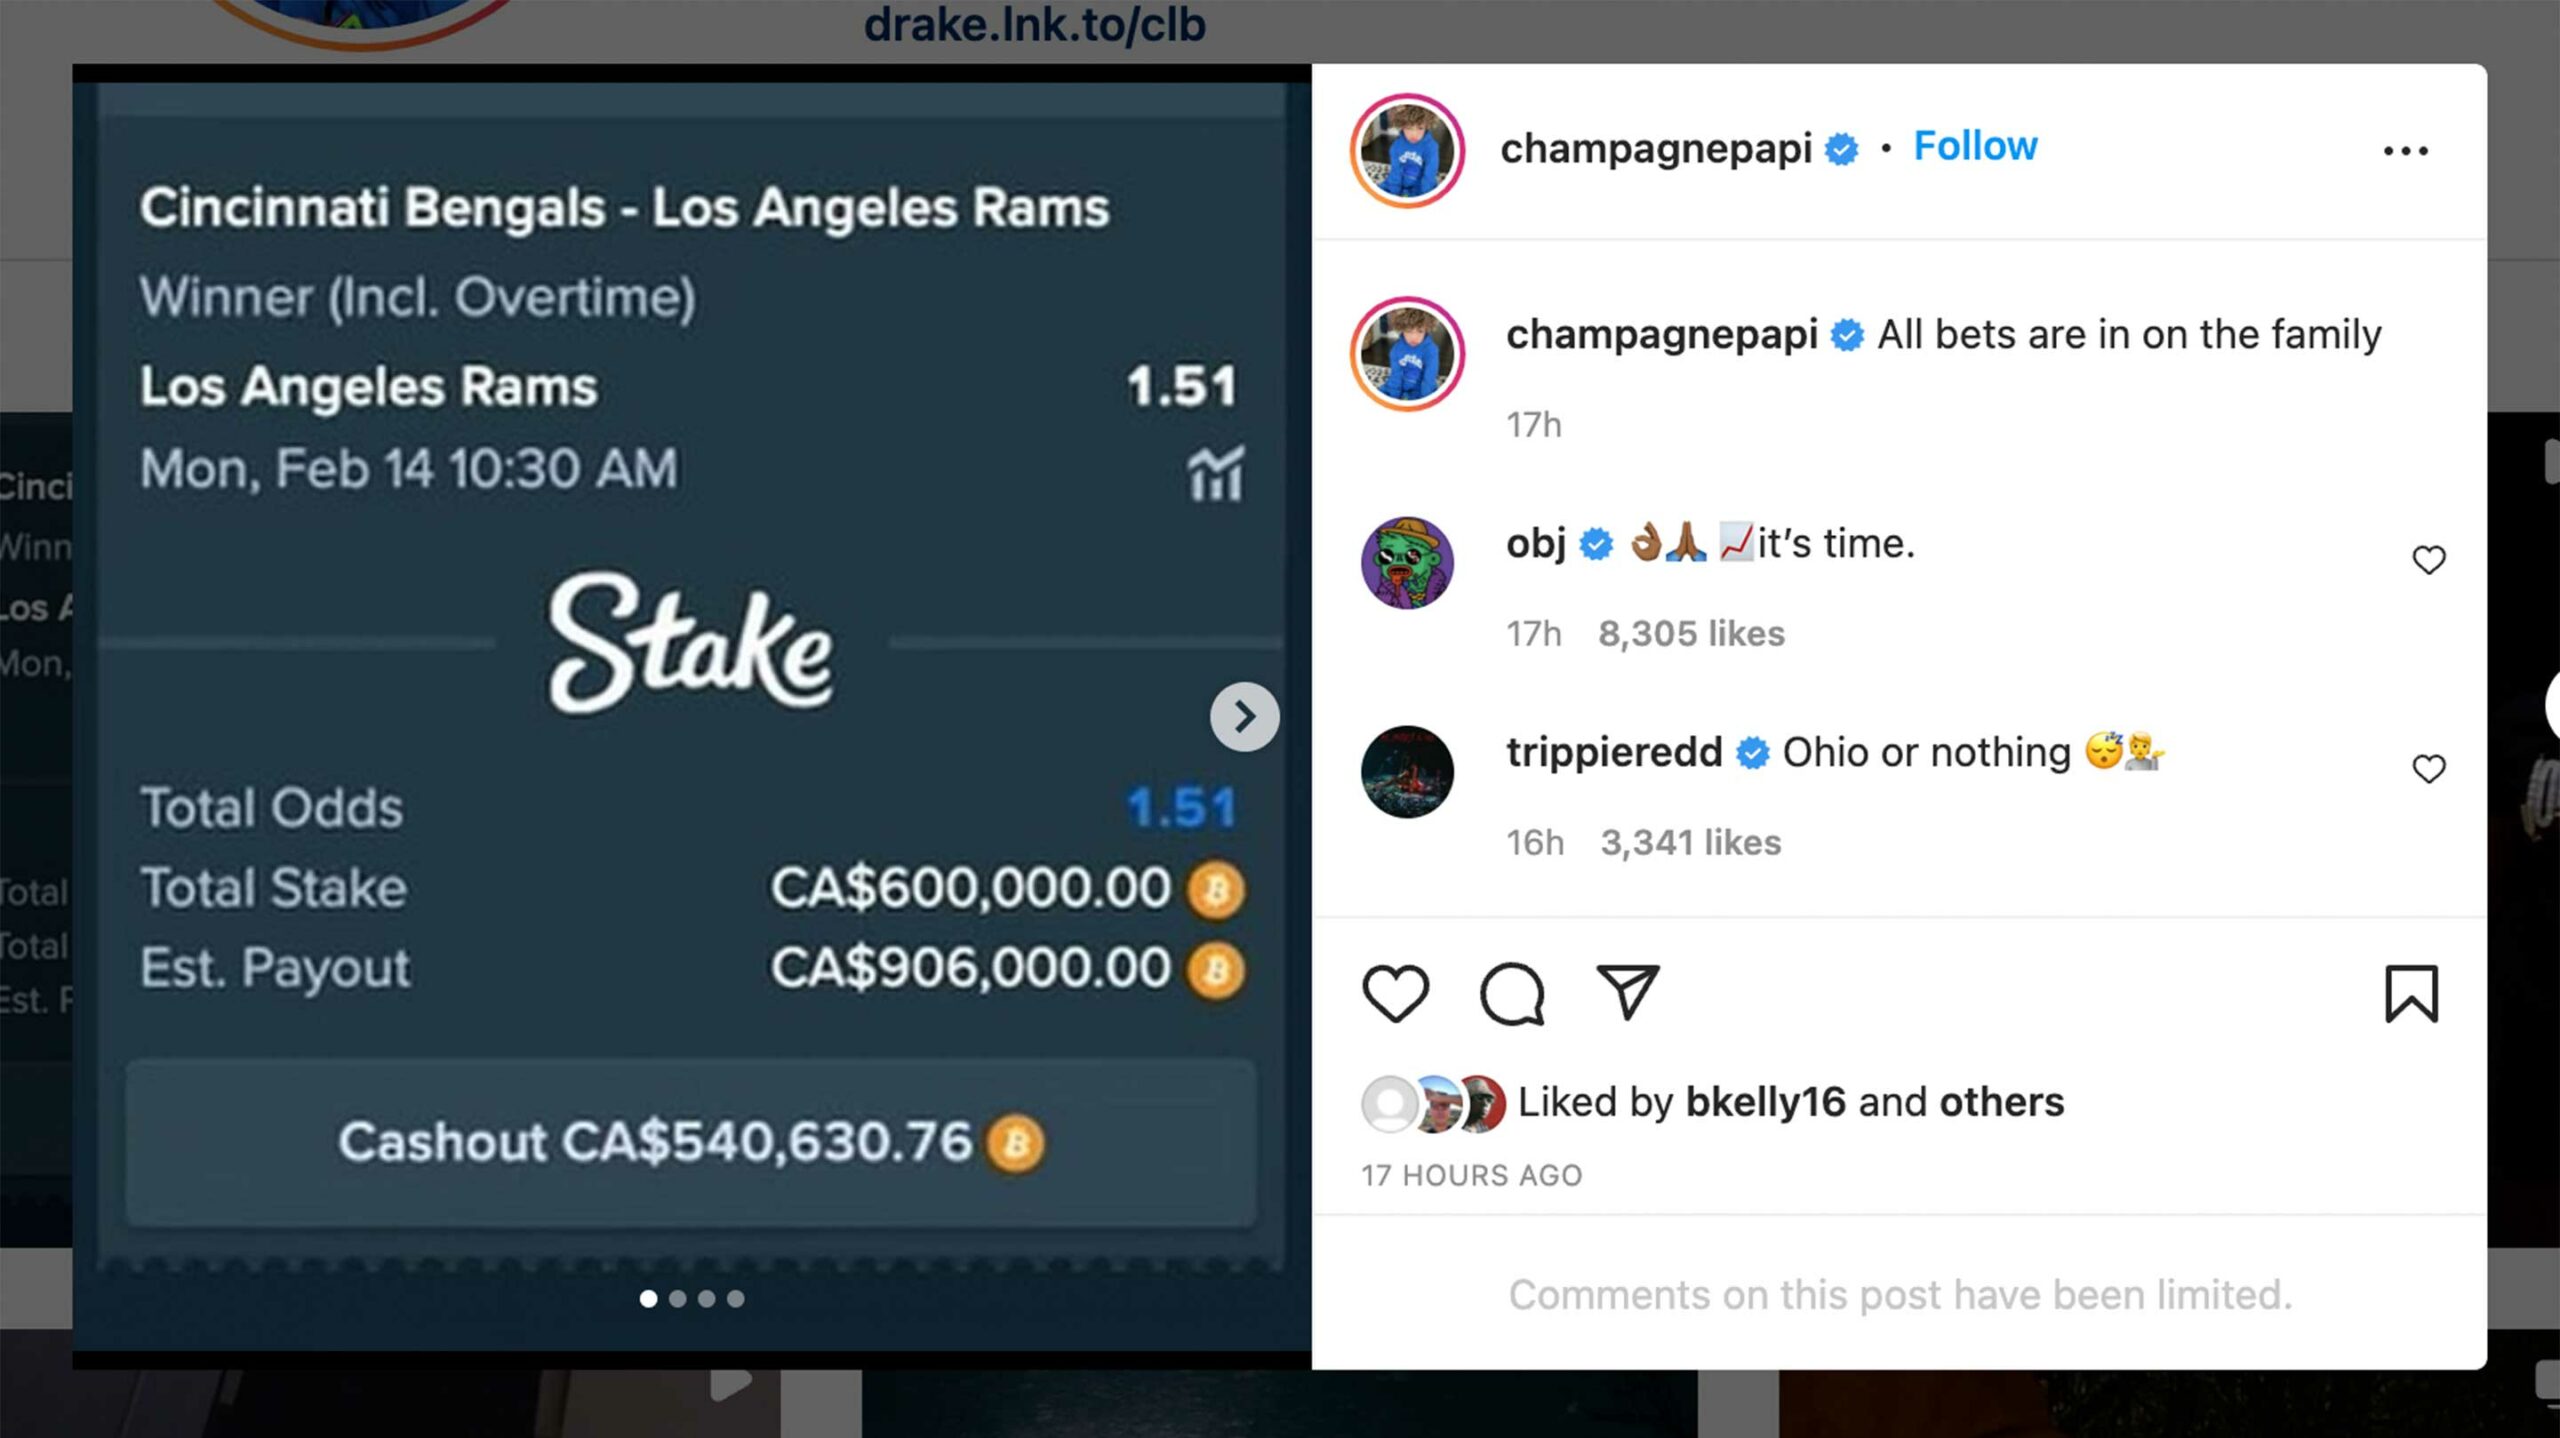 Drake uses Bitcoin for his million dollar Super Bowl bets